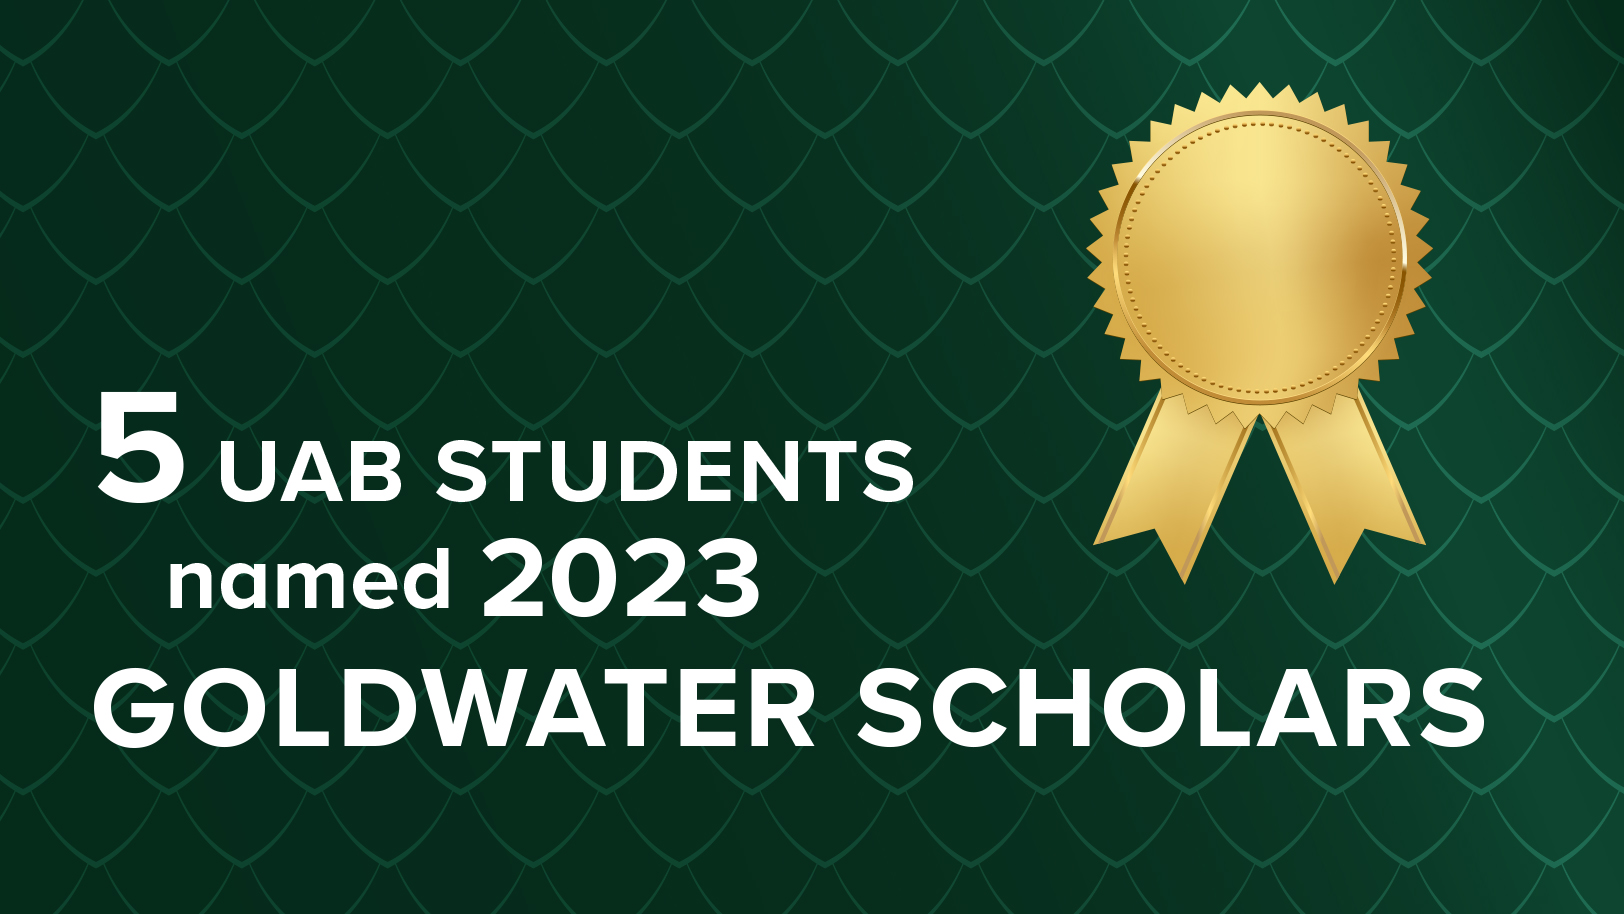 5 UAB students named 2023 Goldwater Scholars